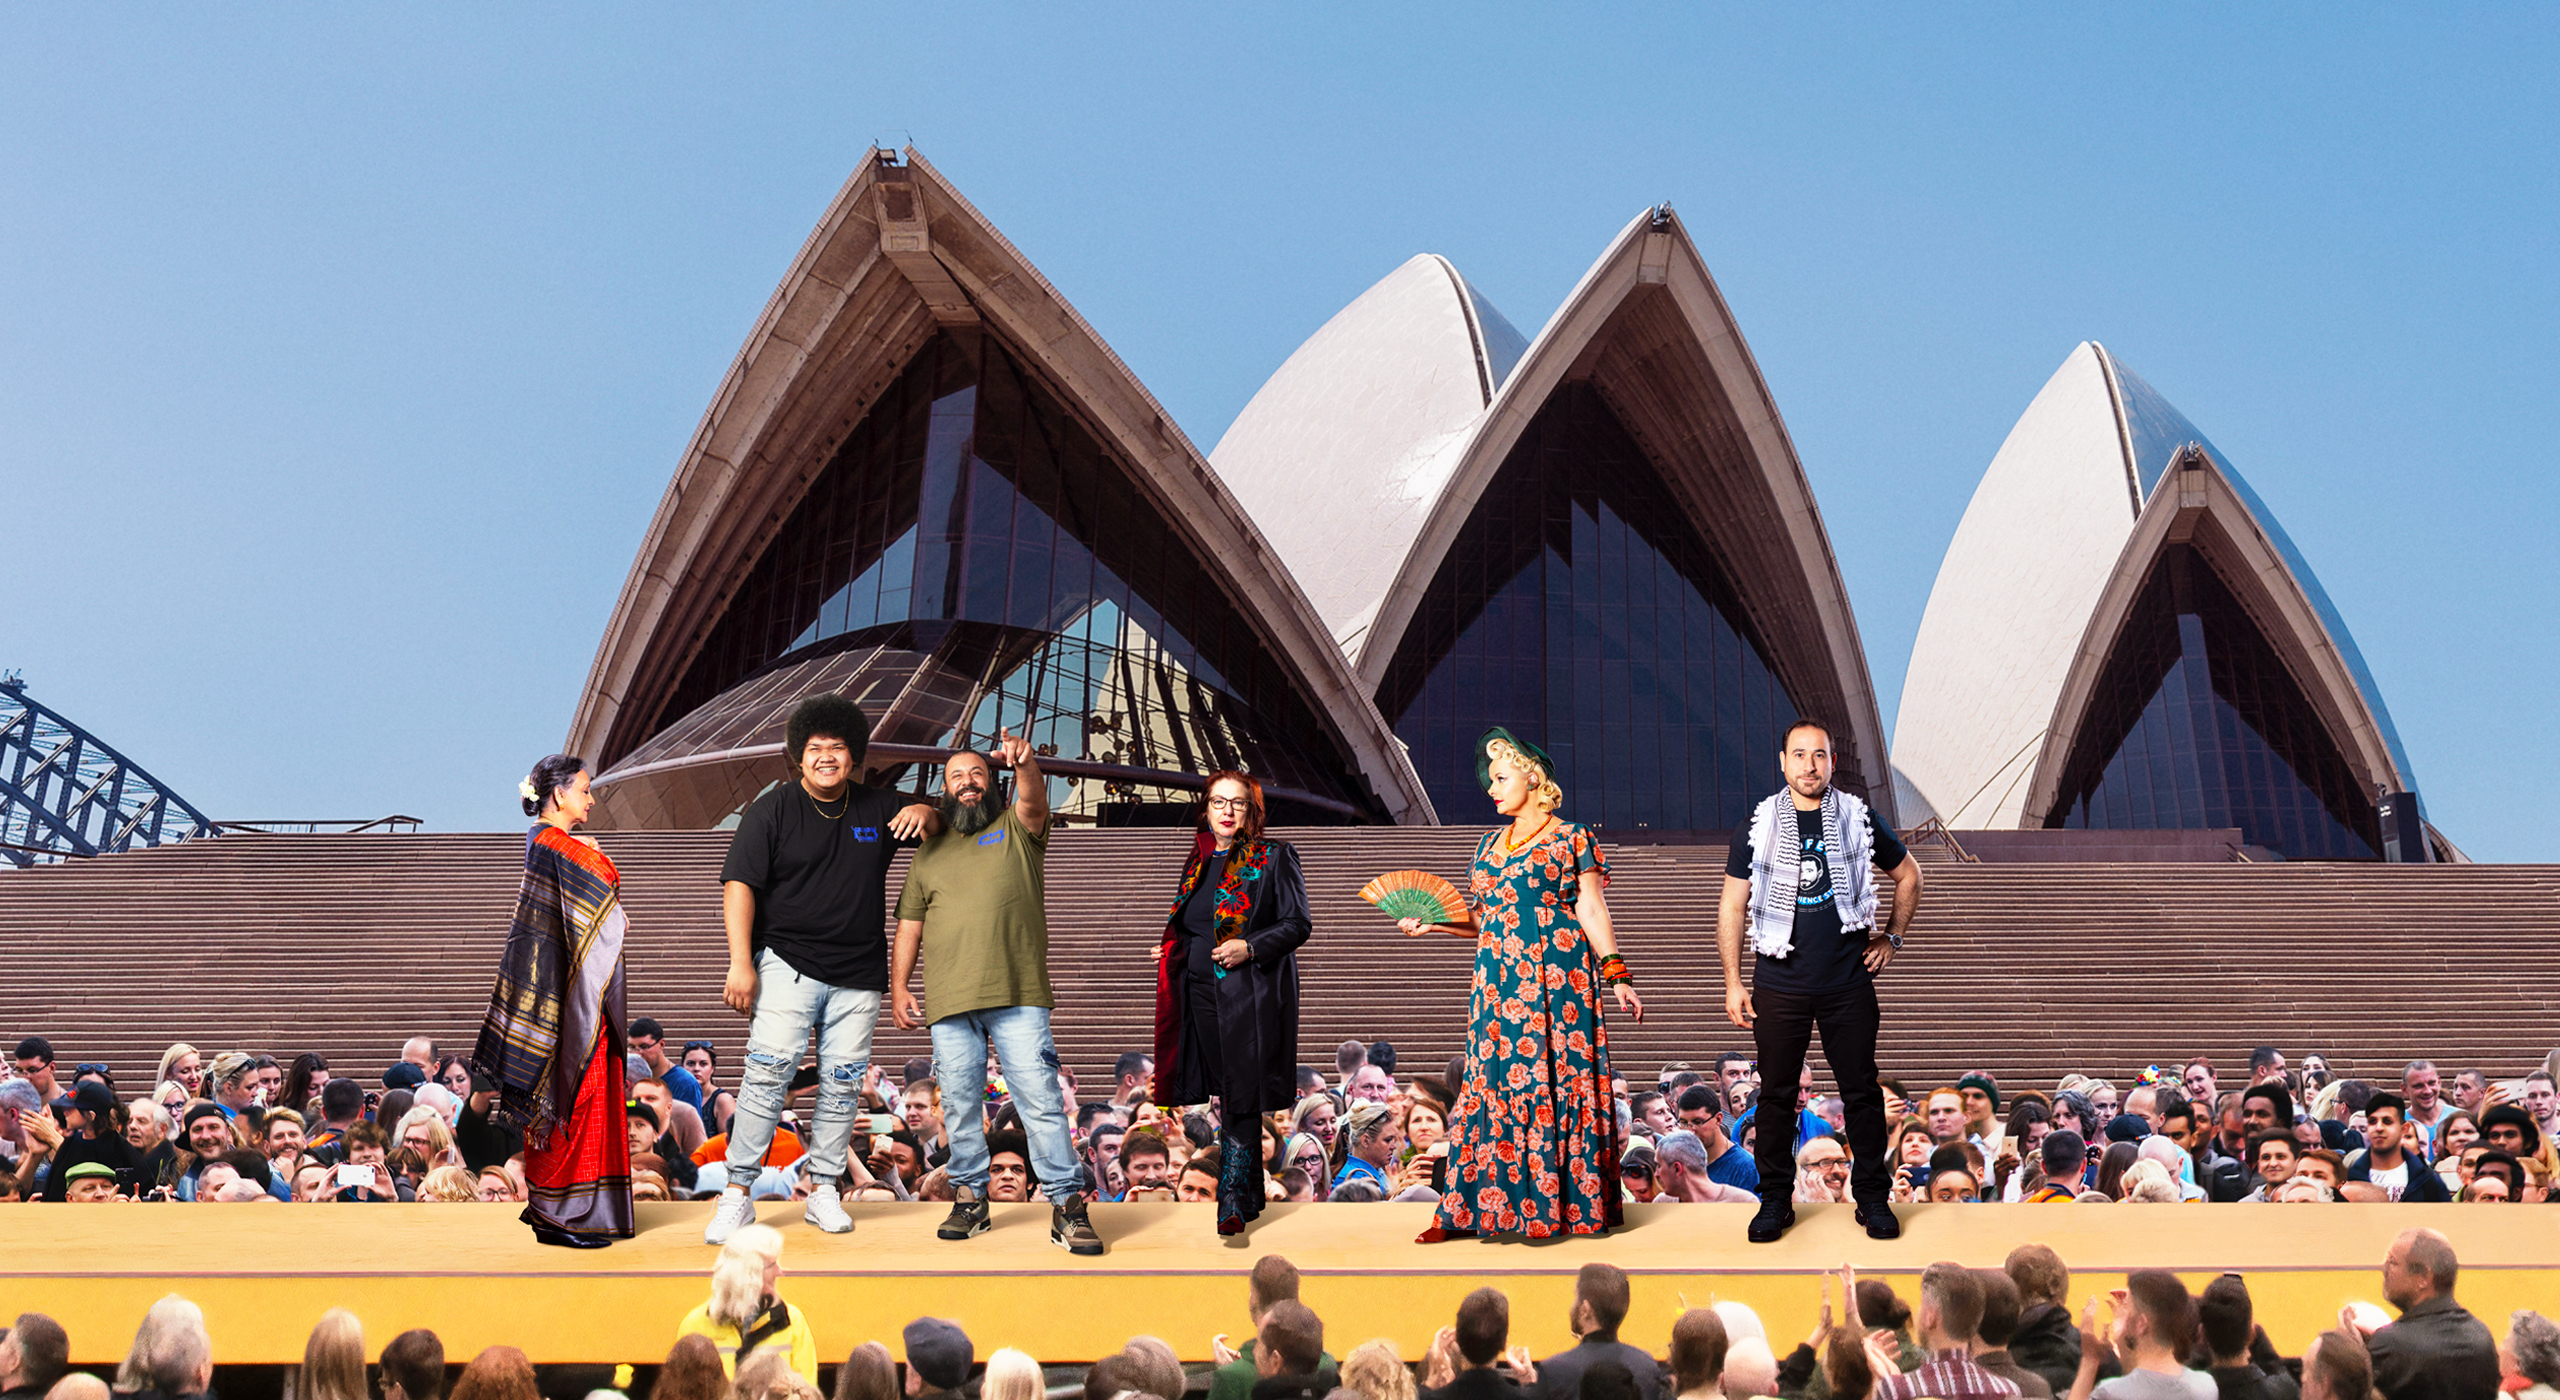 Three men and three women from different backgrounds stand on a yellow platform in front of the Sydney Opera House sails in front of an audience.